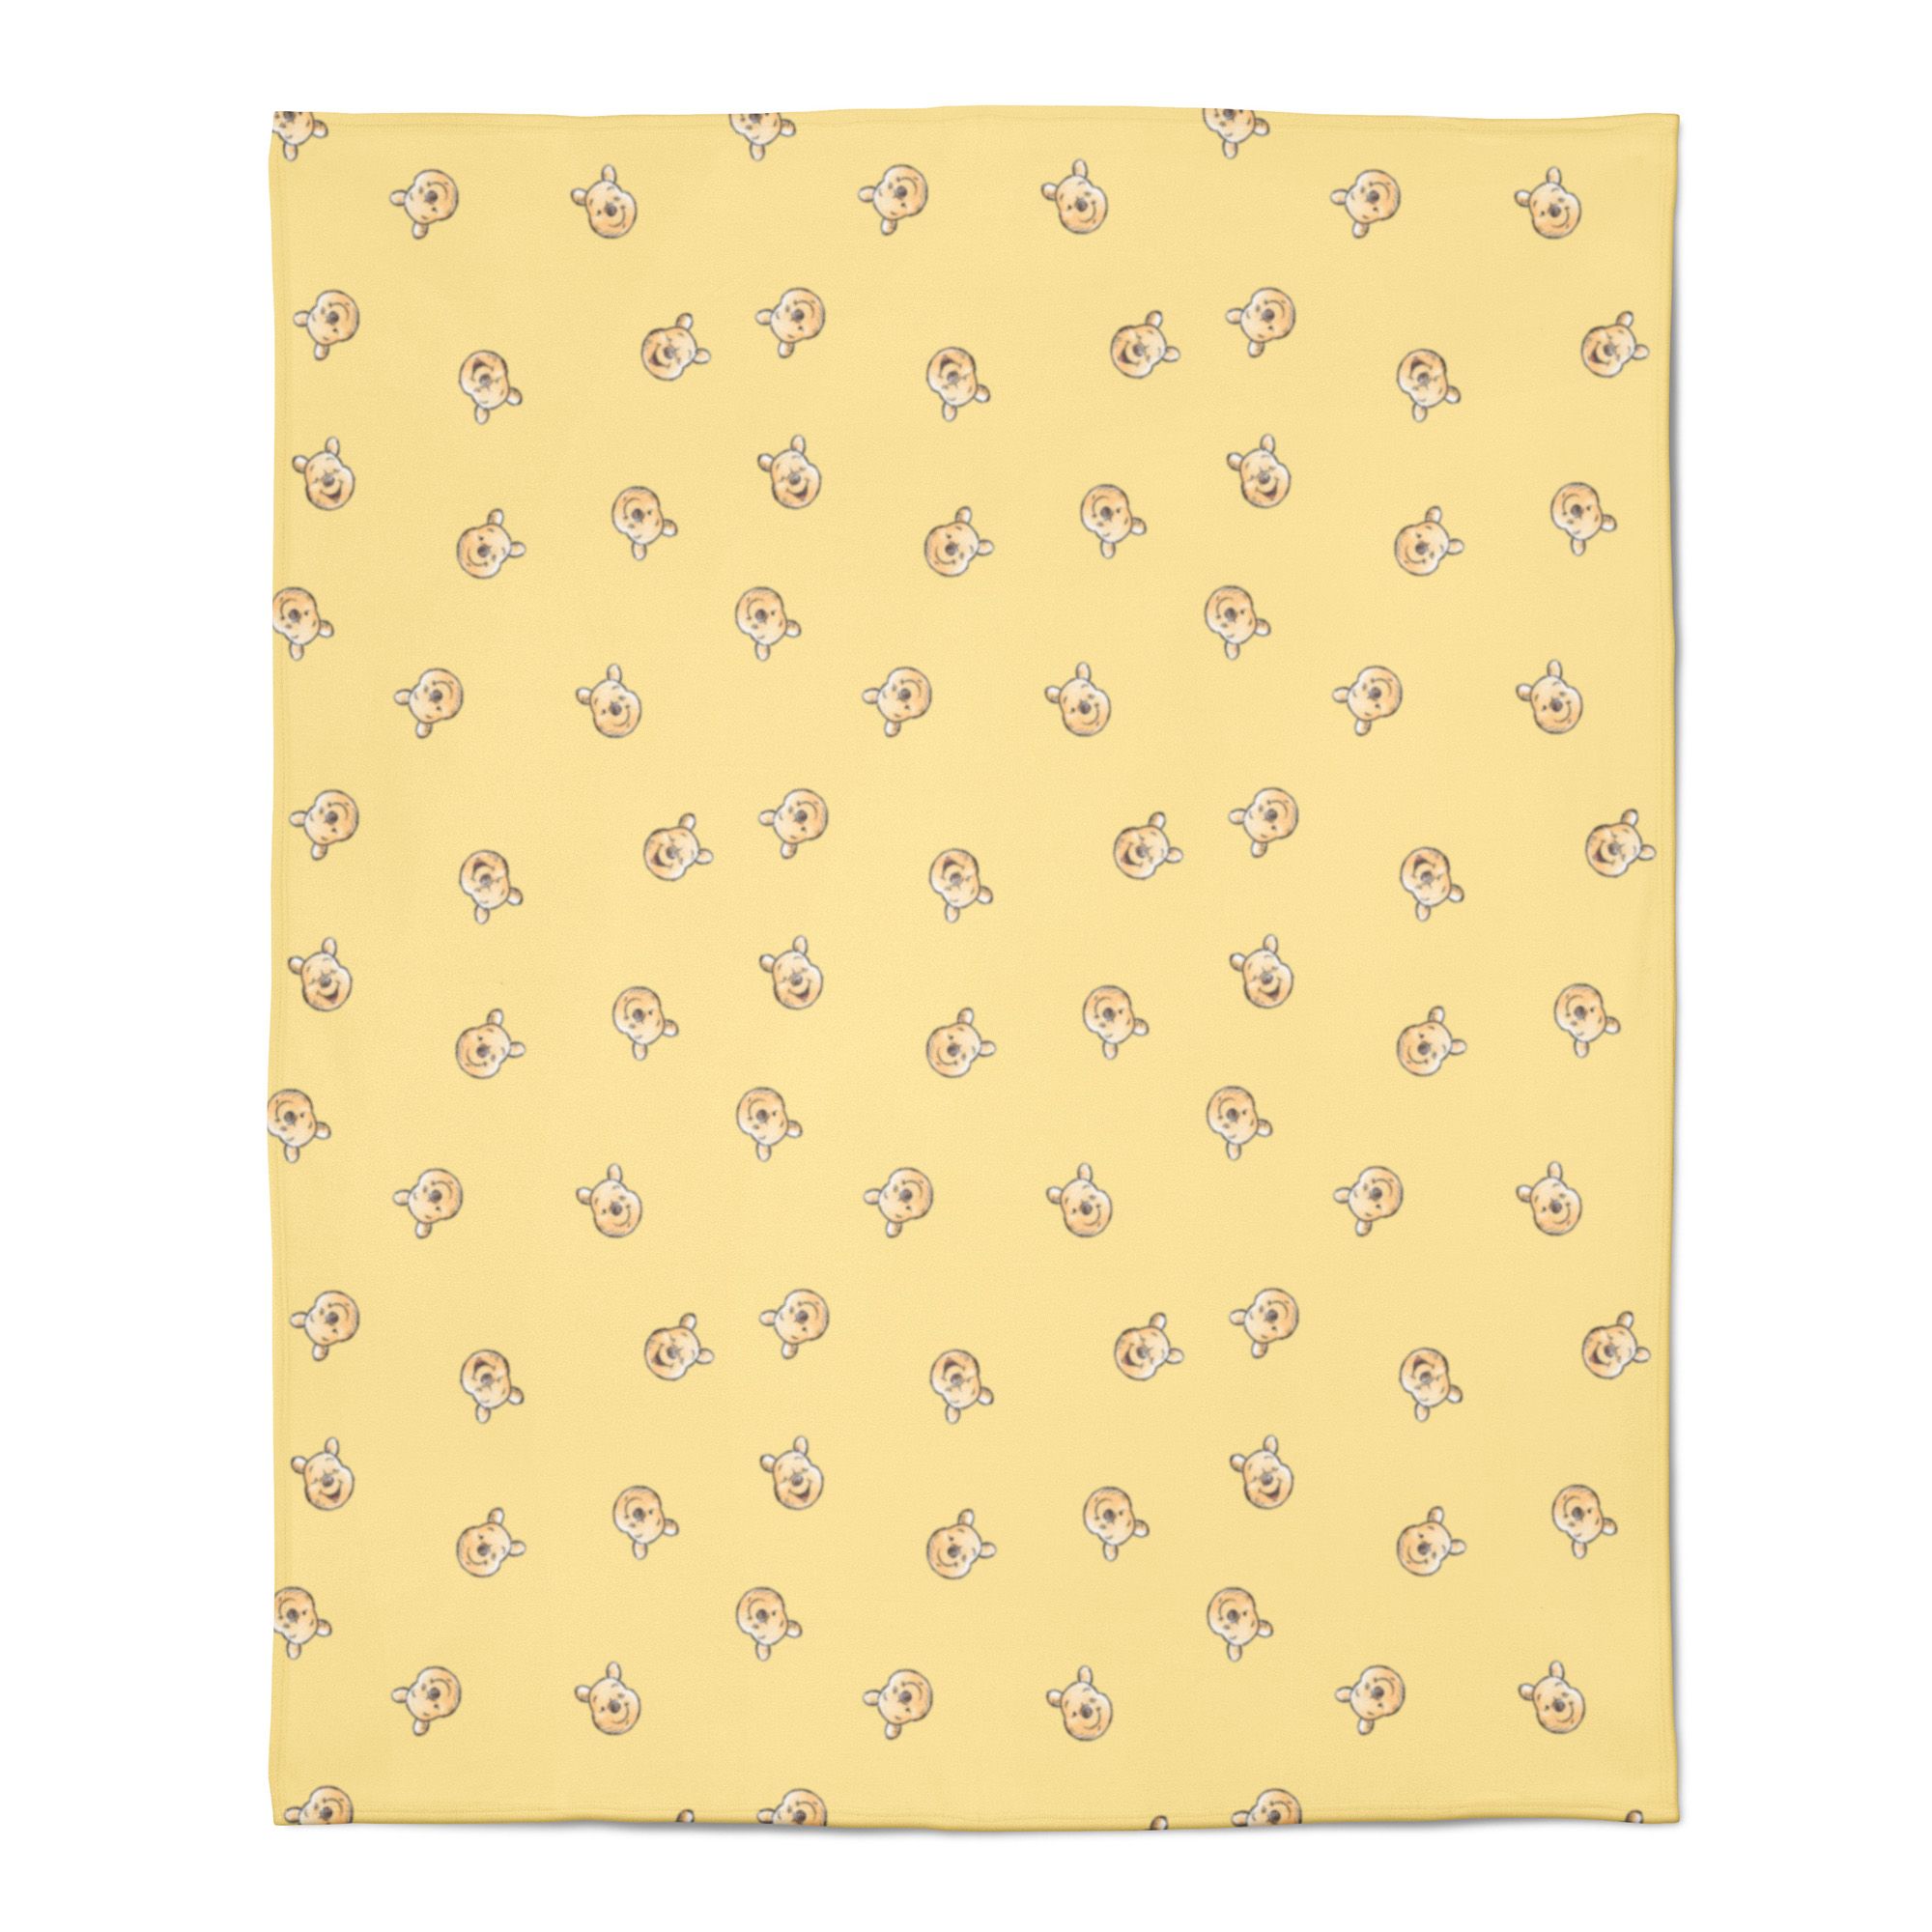 Let our high quality muslin assure you that you’re doing the best thing for your baby’s comfort. Superior breathability, natural give, softness and durability, this 100% cotton Muslin blanket is reversible which features a rotary print of Pooh's face overall on Yellow on one side and yellow and white stripped on the other side . Baby essentials which last a lifetime and provide happiness throughout generations! Breathable and soft muslin cozy fabric helps prevent overheating and is gentle against baby’s sensitive skin. Our large 100 x 150 cm blanket provides you and your little bundle of joy with enough space without having to fear that they will outgrow the blanket too soon

 This is an official Disney Winnie the Pooh merchandise, you can now pair it up with matching Duvet cover set, hooded towels, Fitted cot sheets and sleeping bags from the same collection.
This collection is verified by OEKO-TEX® and independently tested for harmful substances. It stands for customer confidence and high product safety. All our Cotton products are COGTS certified.